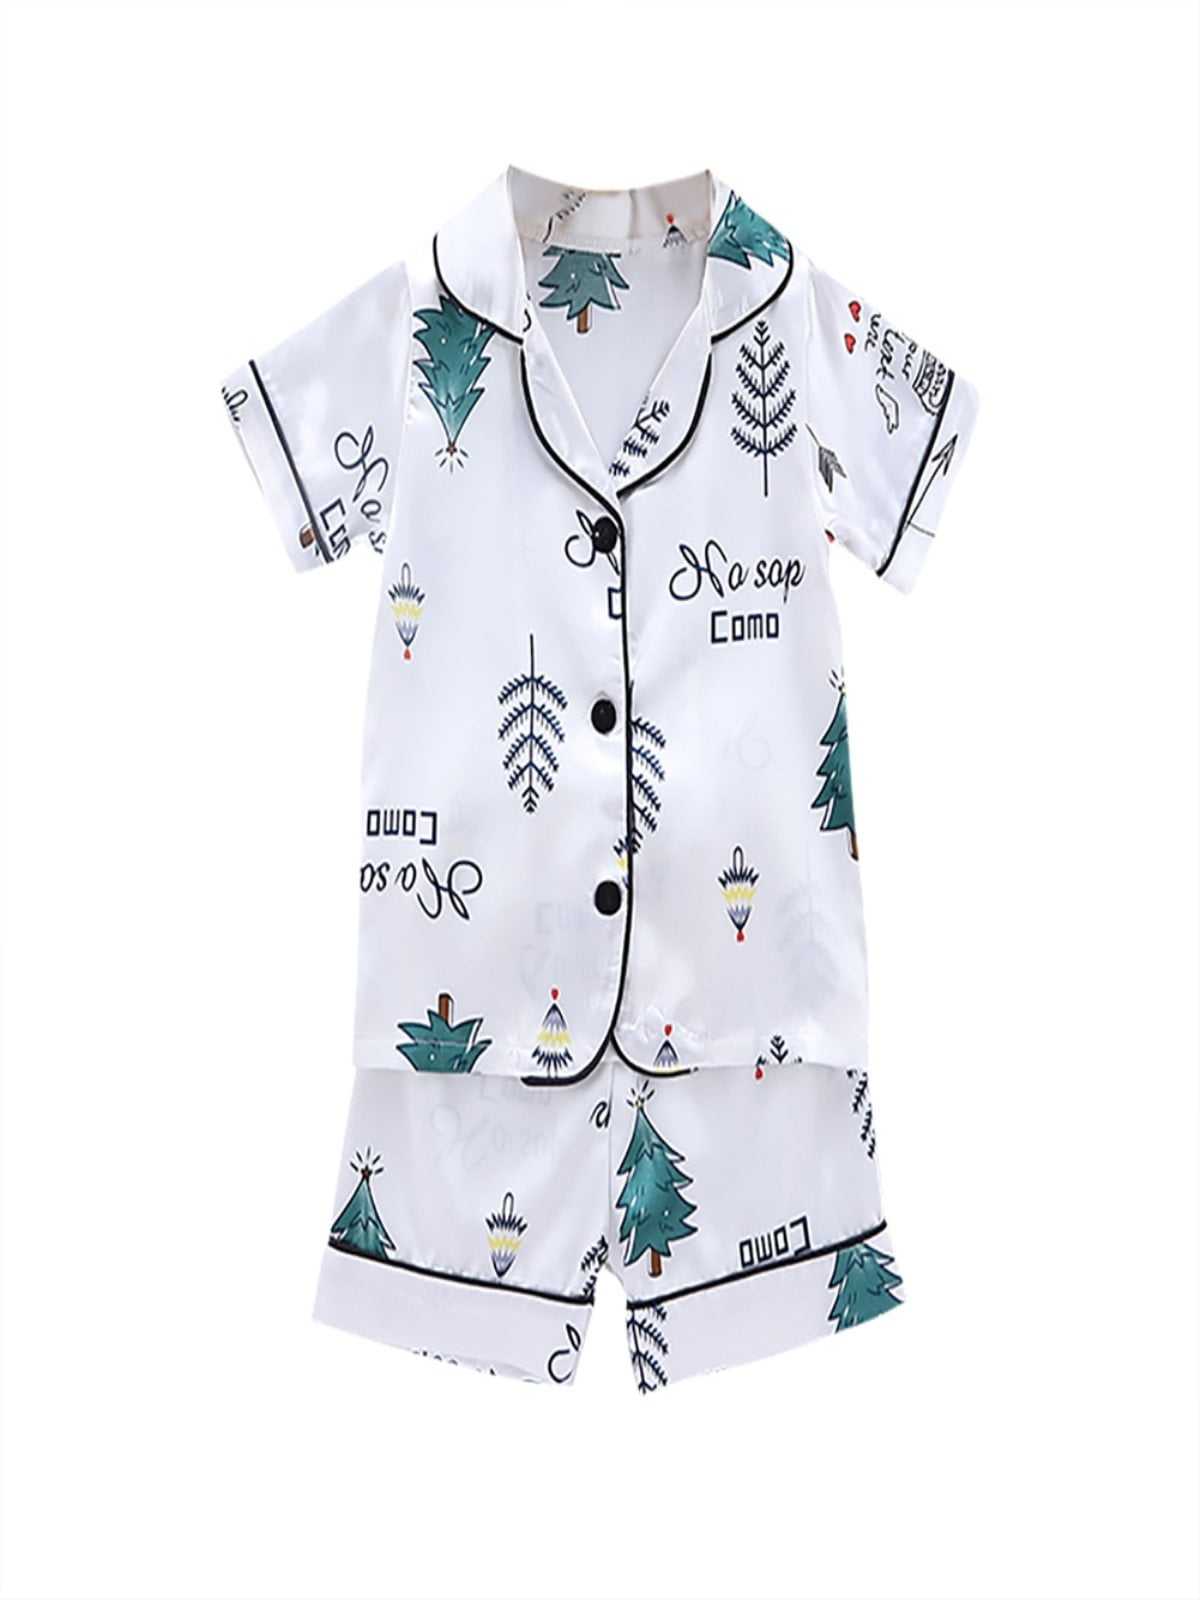 Details about   Toddler Baby Boy Girl Short Sleeve Cartoon Tops+Shorts Pajamas Sleepwear Outfits 